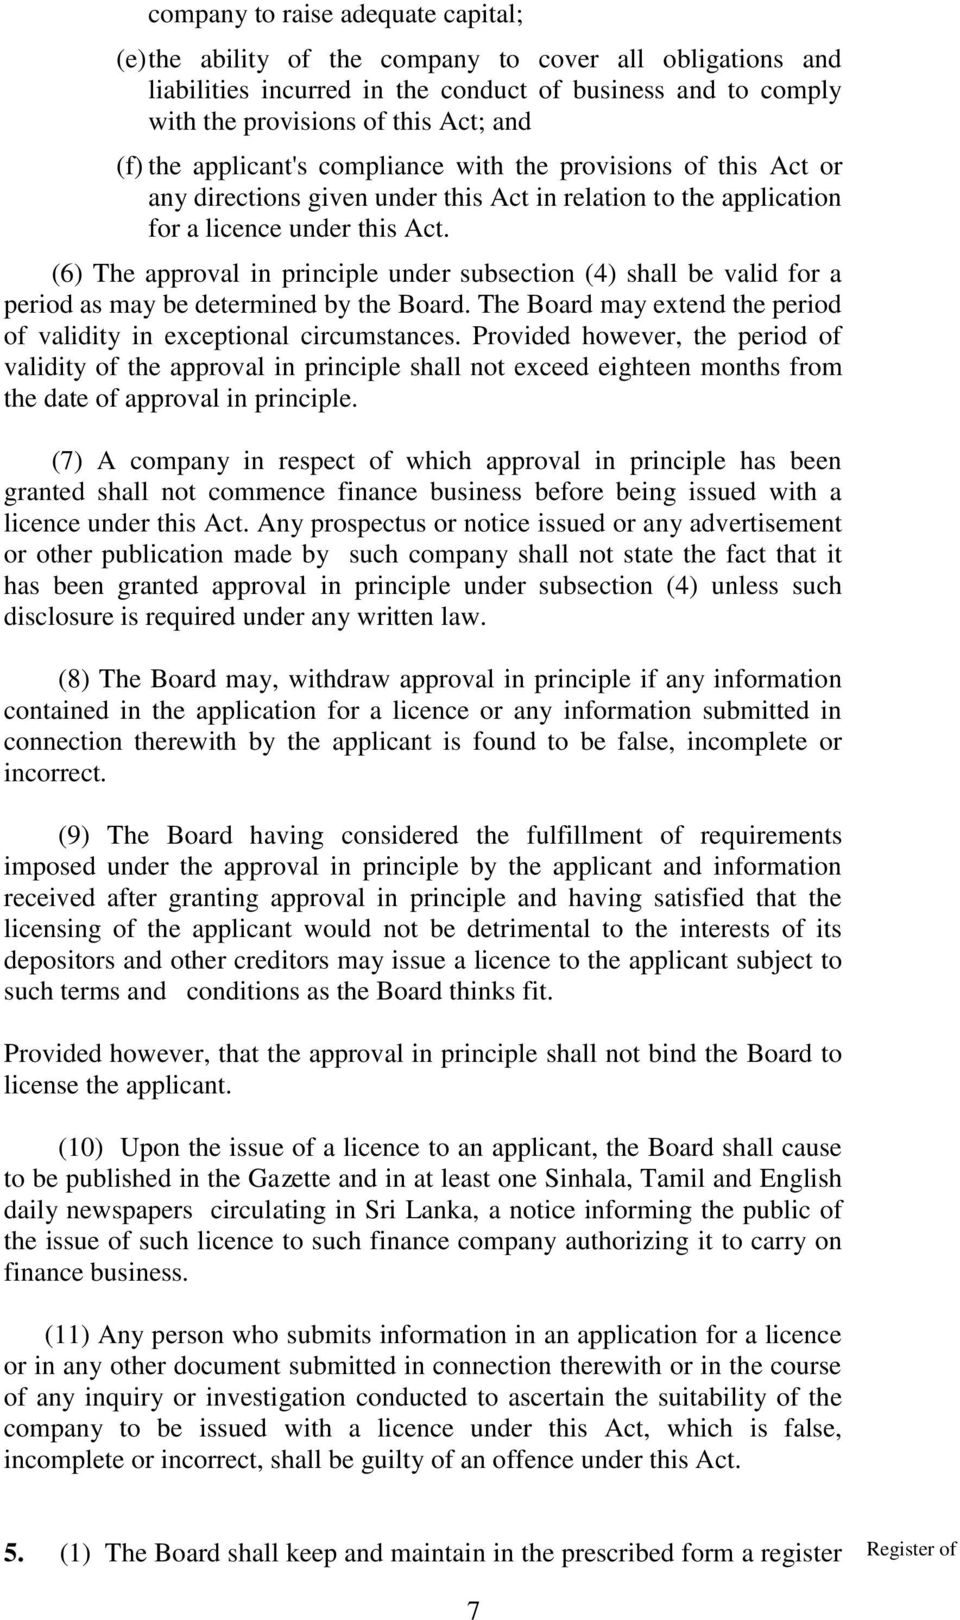 (6) The approval in principle under subsection (4) shall be valid for a period as may be determined by the Board. The Board may extend the period of validity in exceptional circumstances.